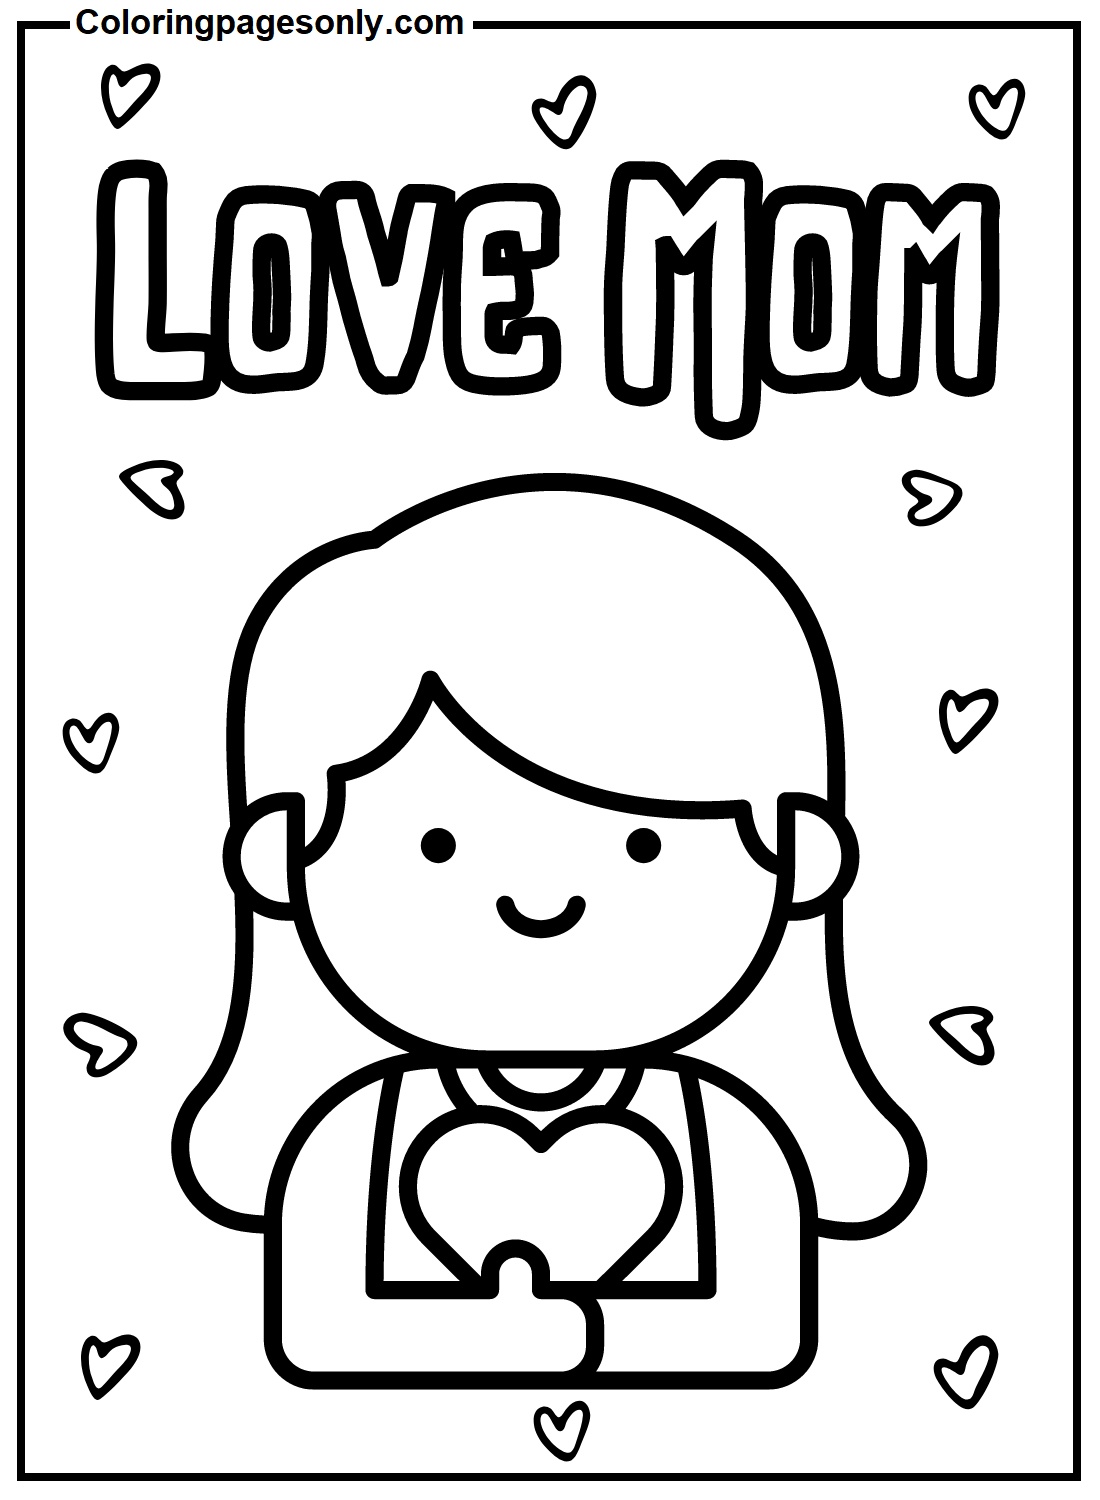 Girl Love Mom Coloring Page